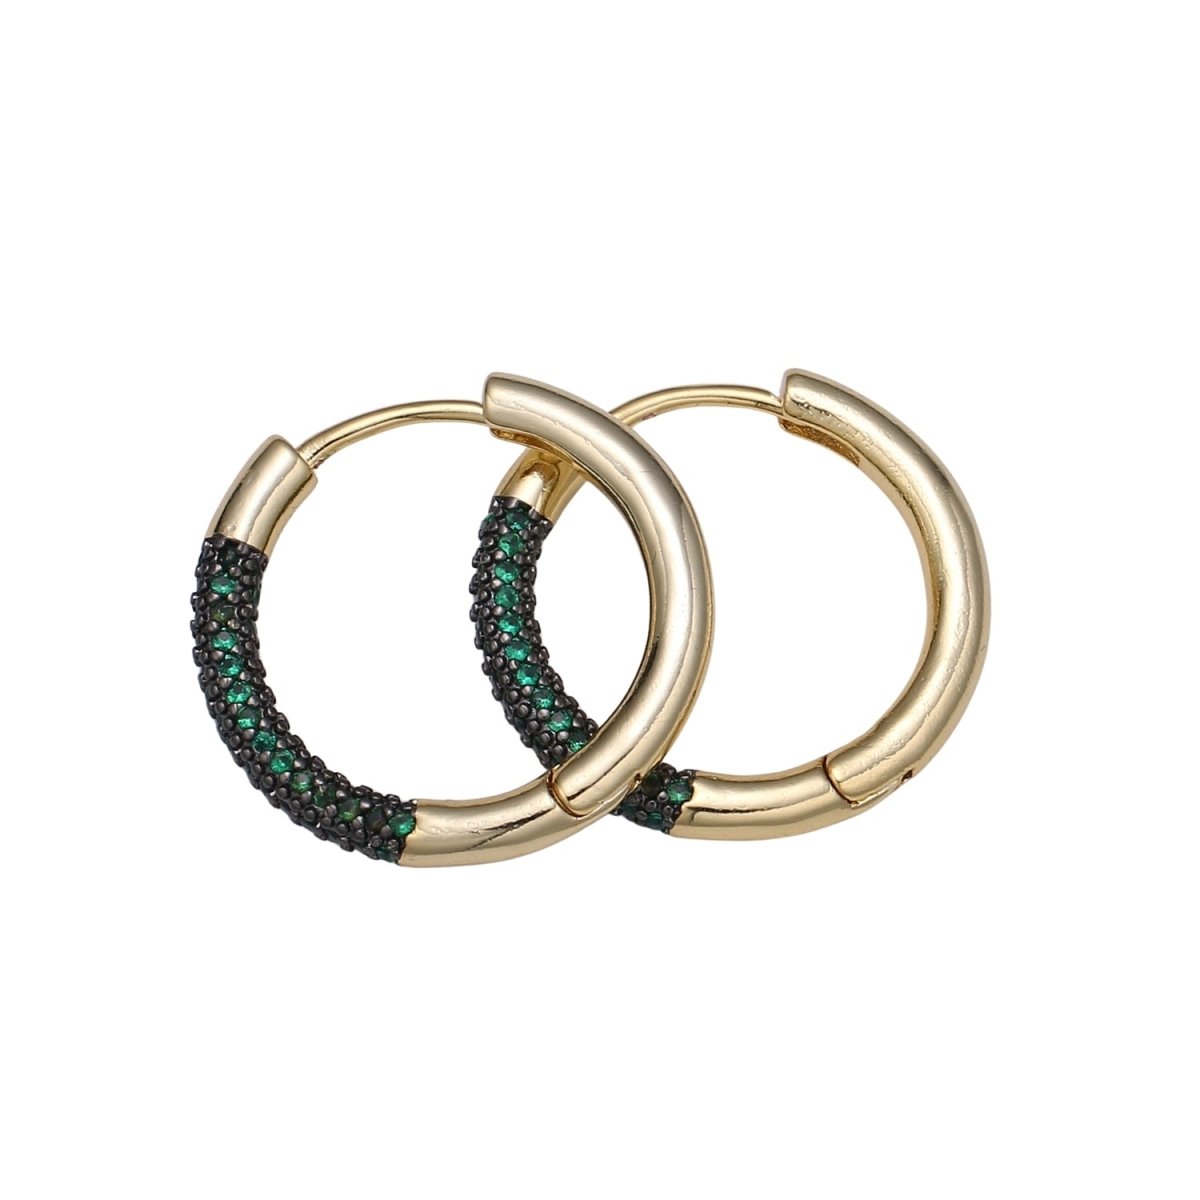 24k Gold Filled Earring Colorful CZ Pave Gold Hoop Earring, Blue, Clear, Green, Purple Hoop Earring for Everyday Wear Q-396 - Q-403 - DLUXCA